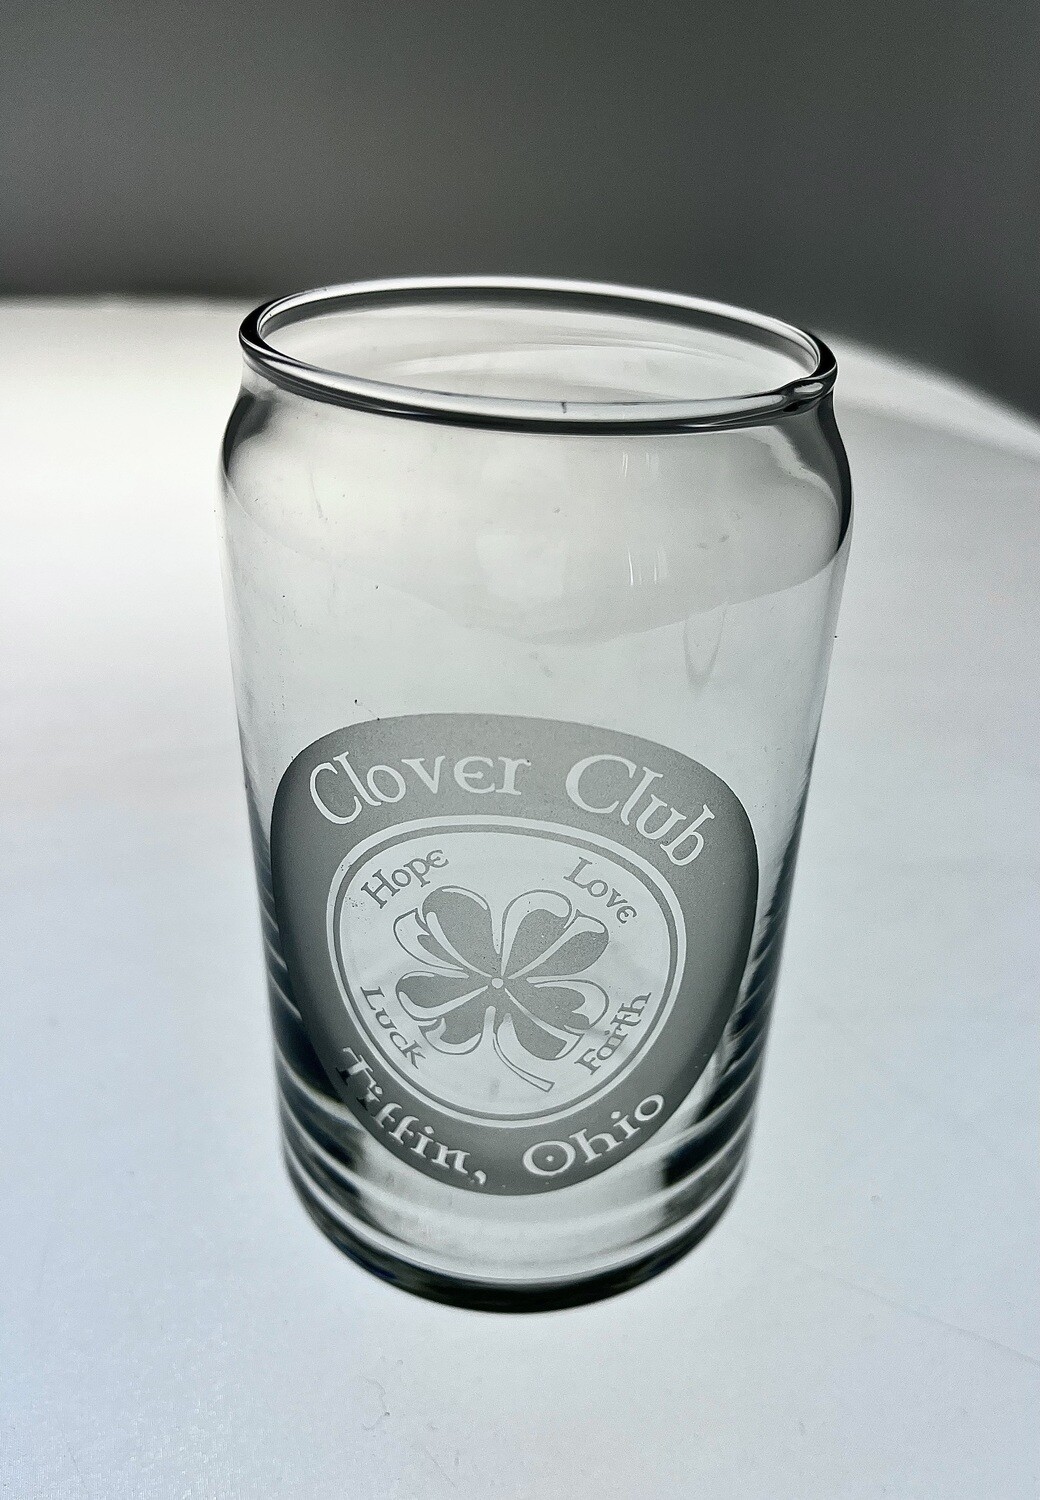 Clover Club beer can glass solid border